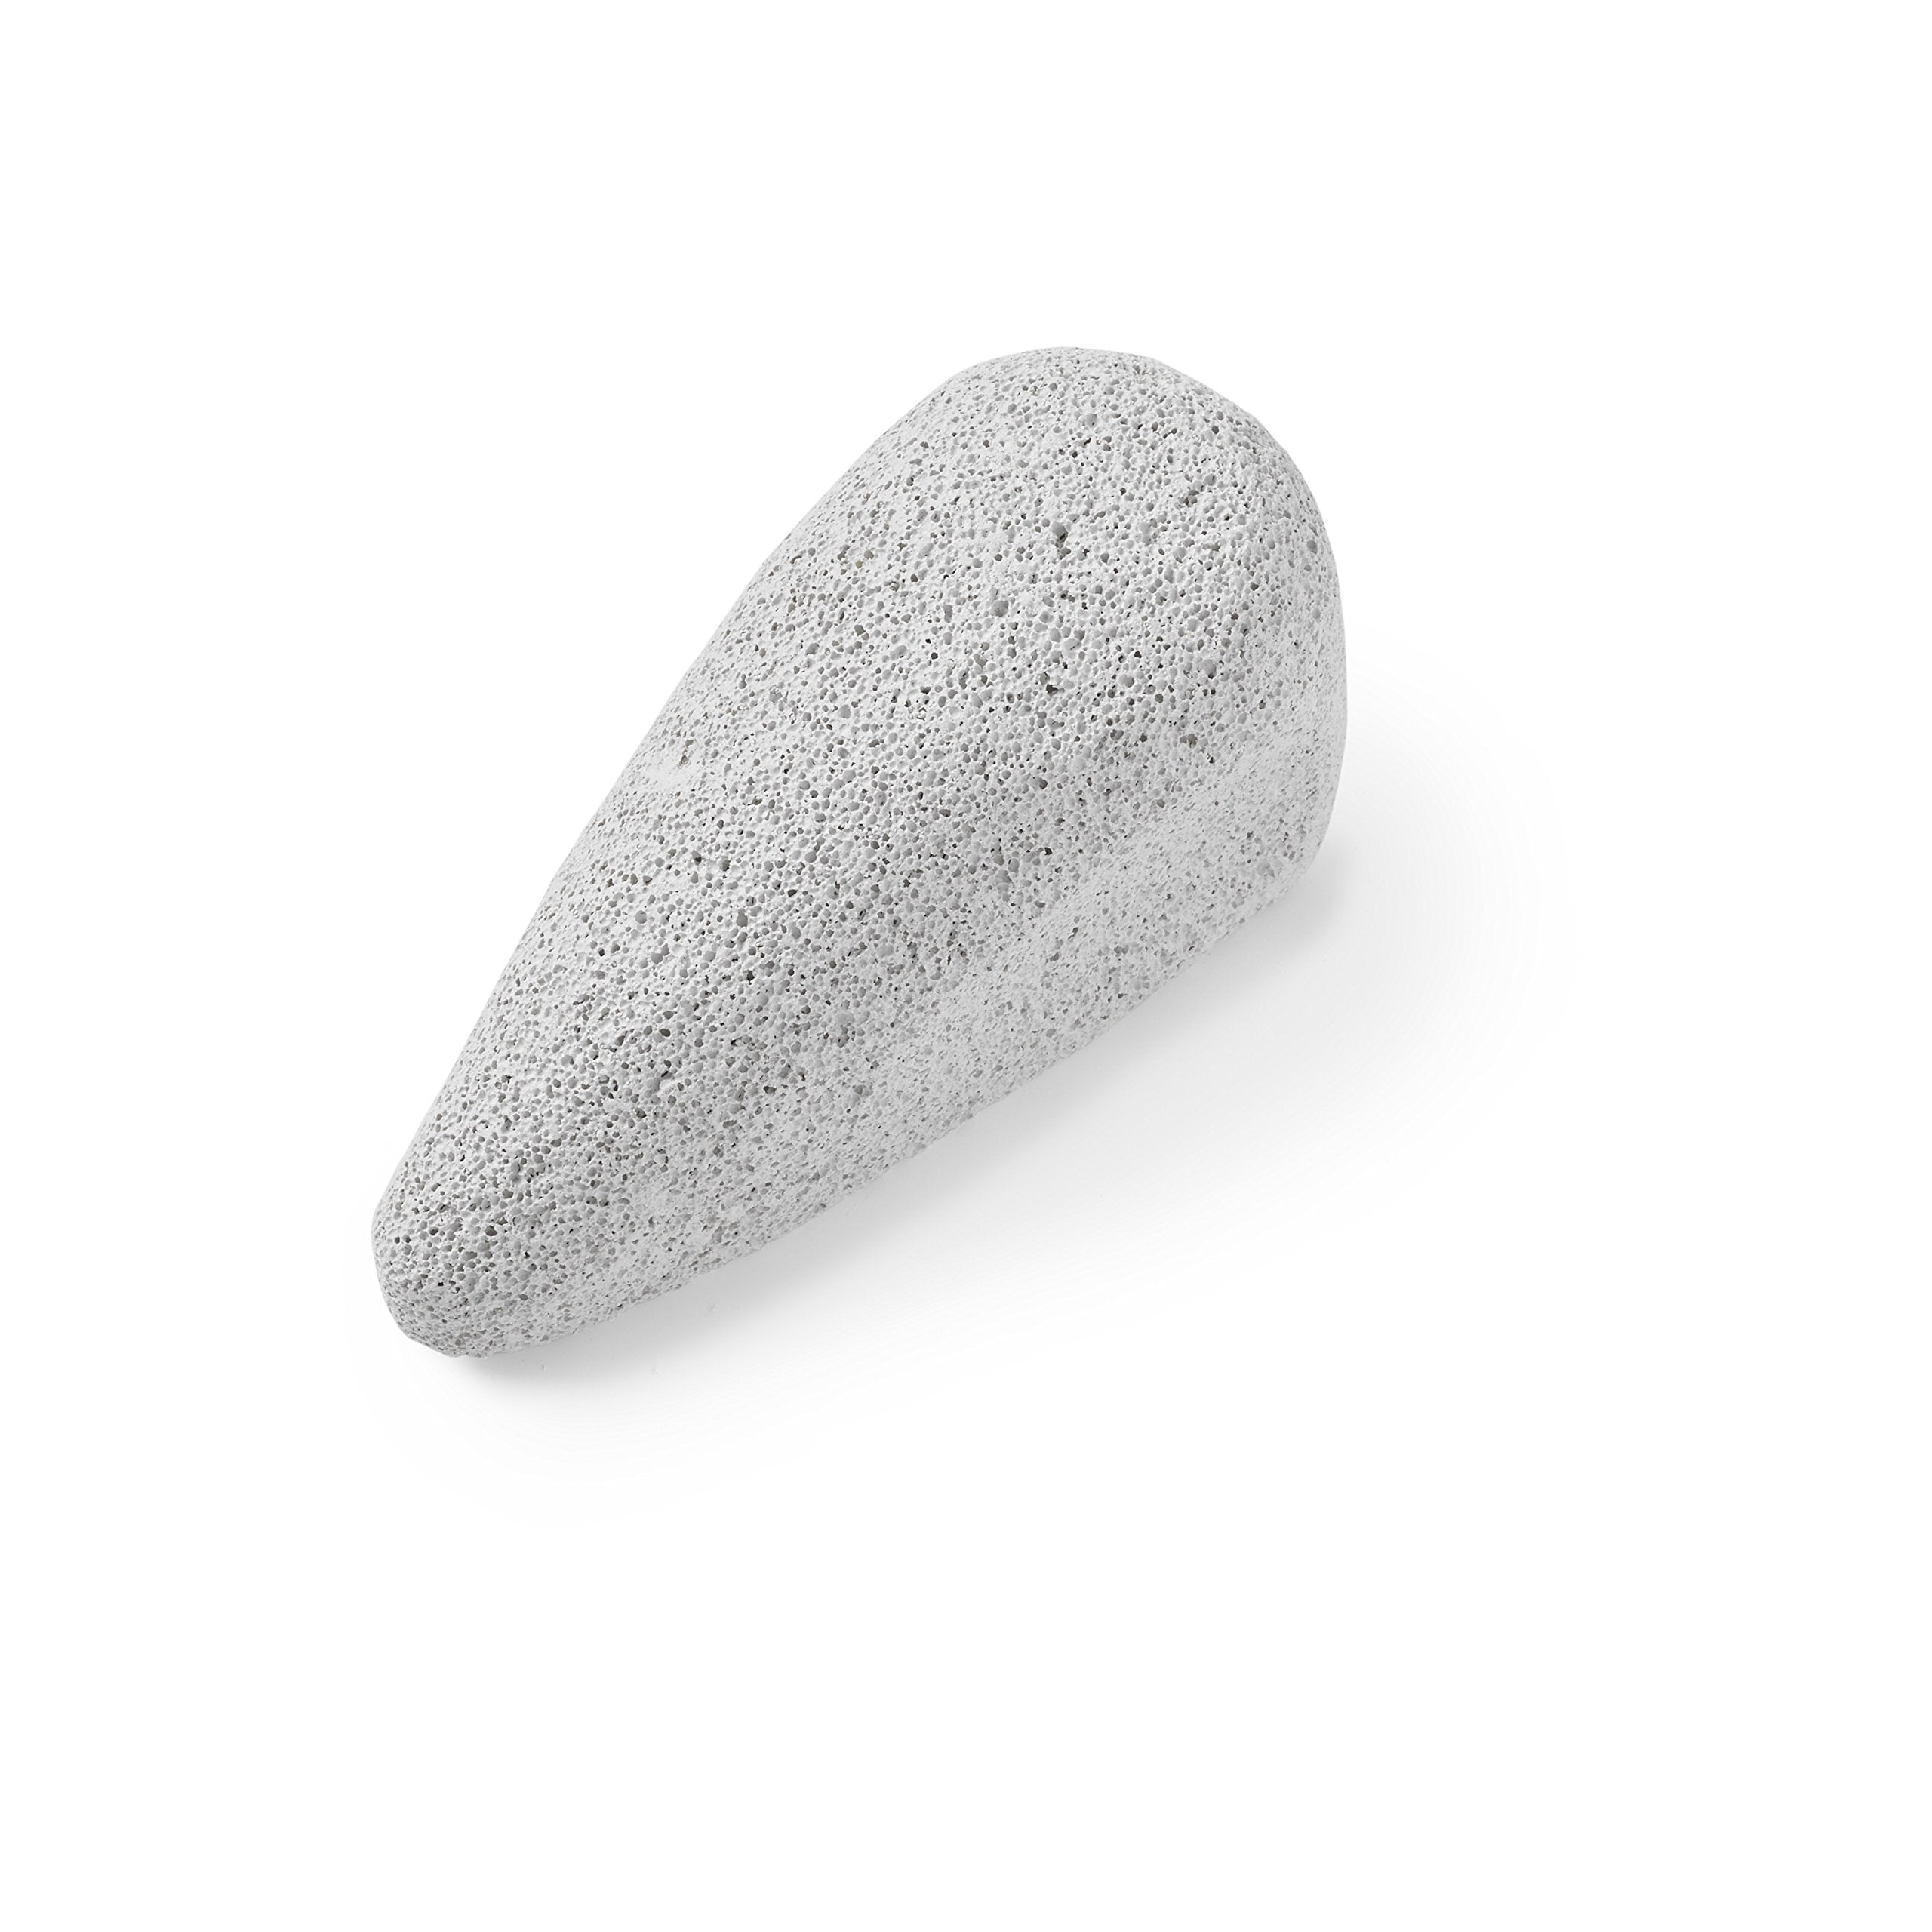 Manicare Mouse Pumice Stone, for The use of eliminating Dry Skin from The feet,1 Count (Pack of 1),MANMAN503